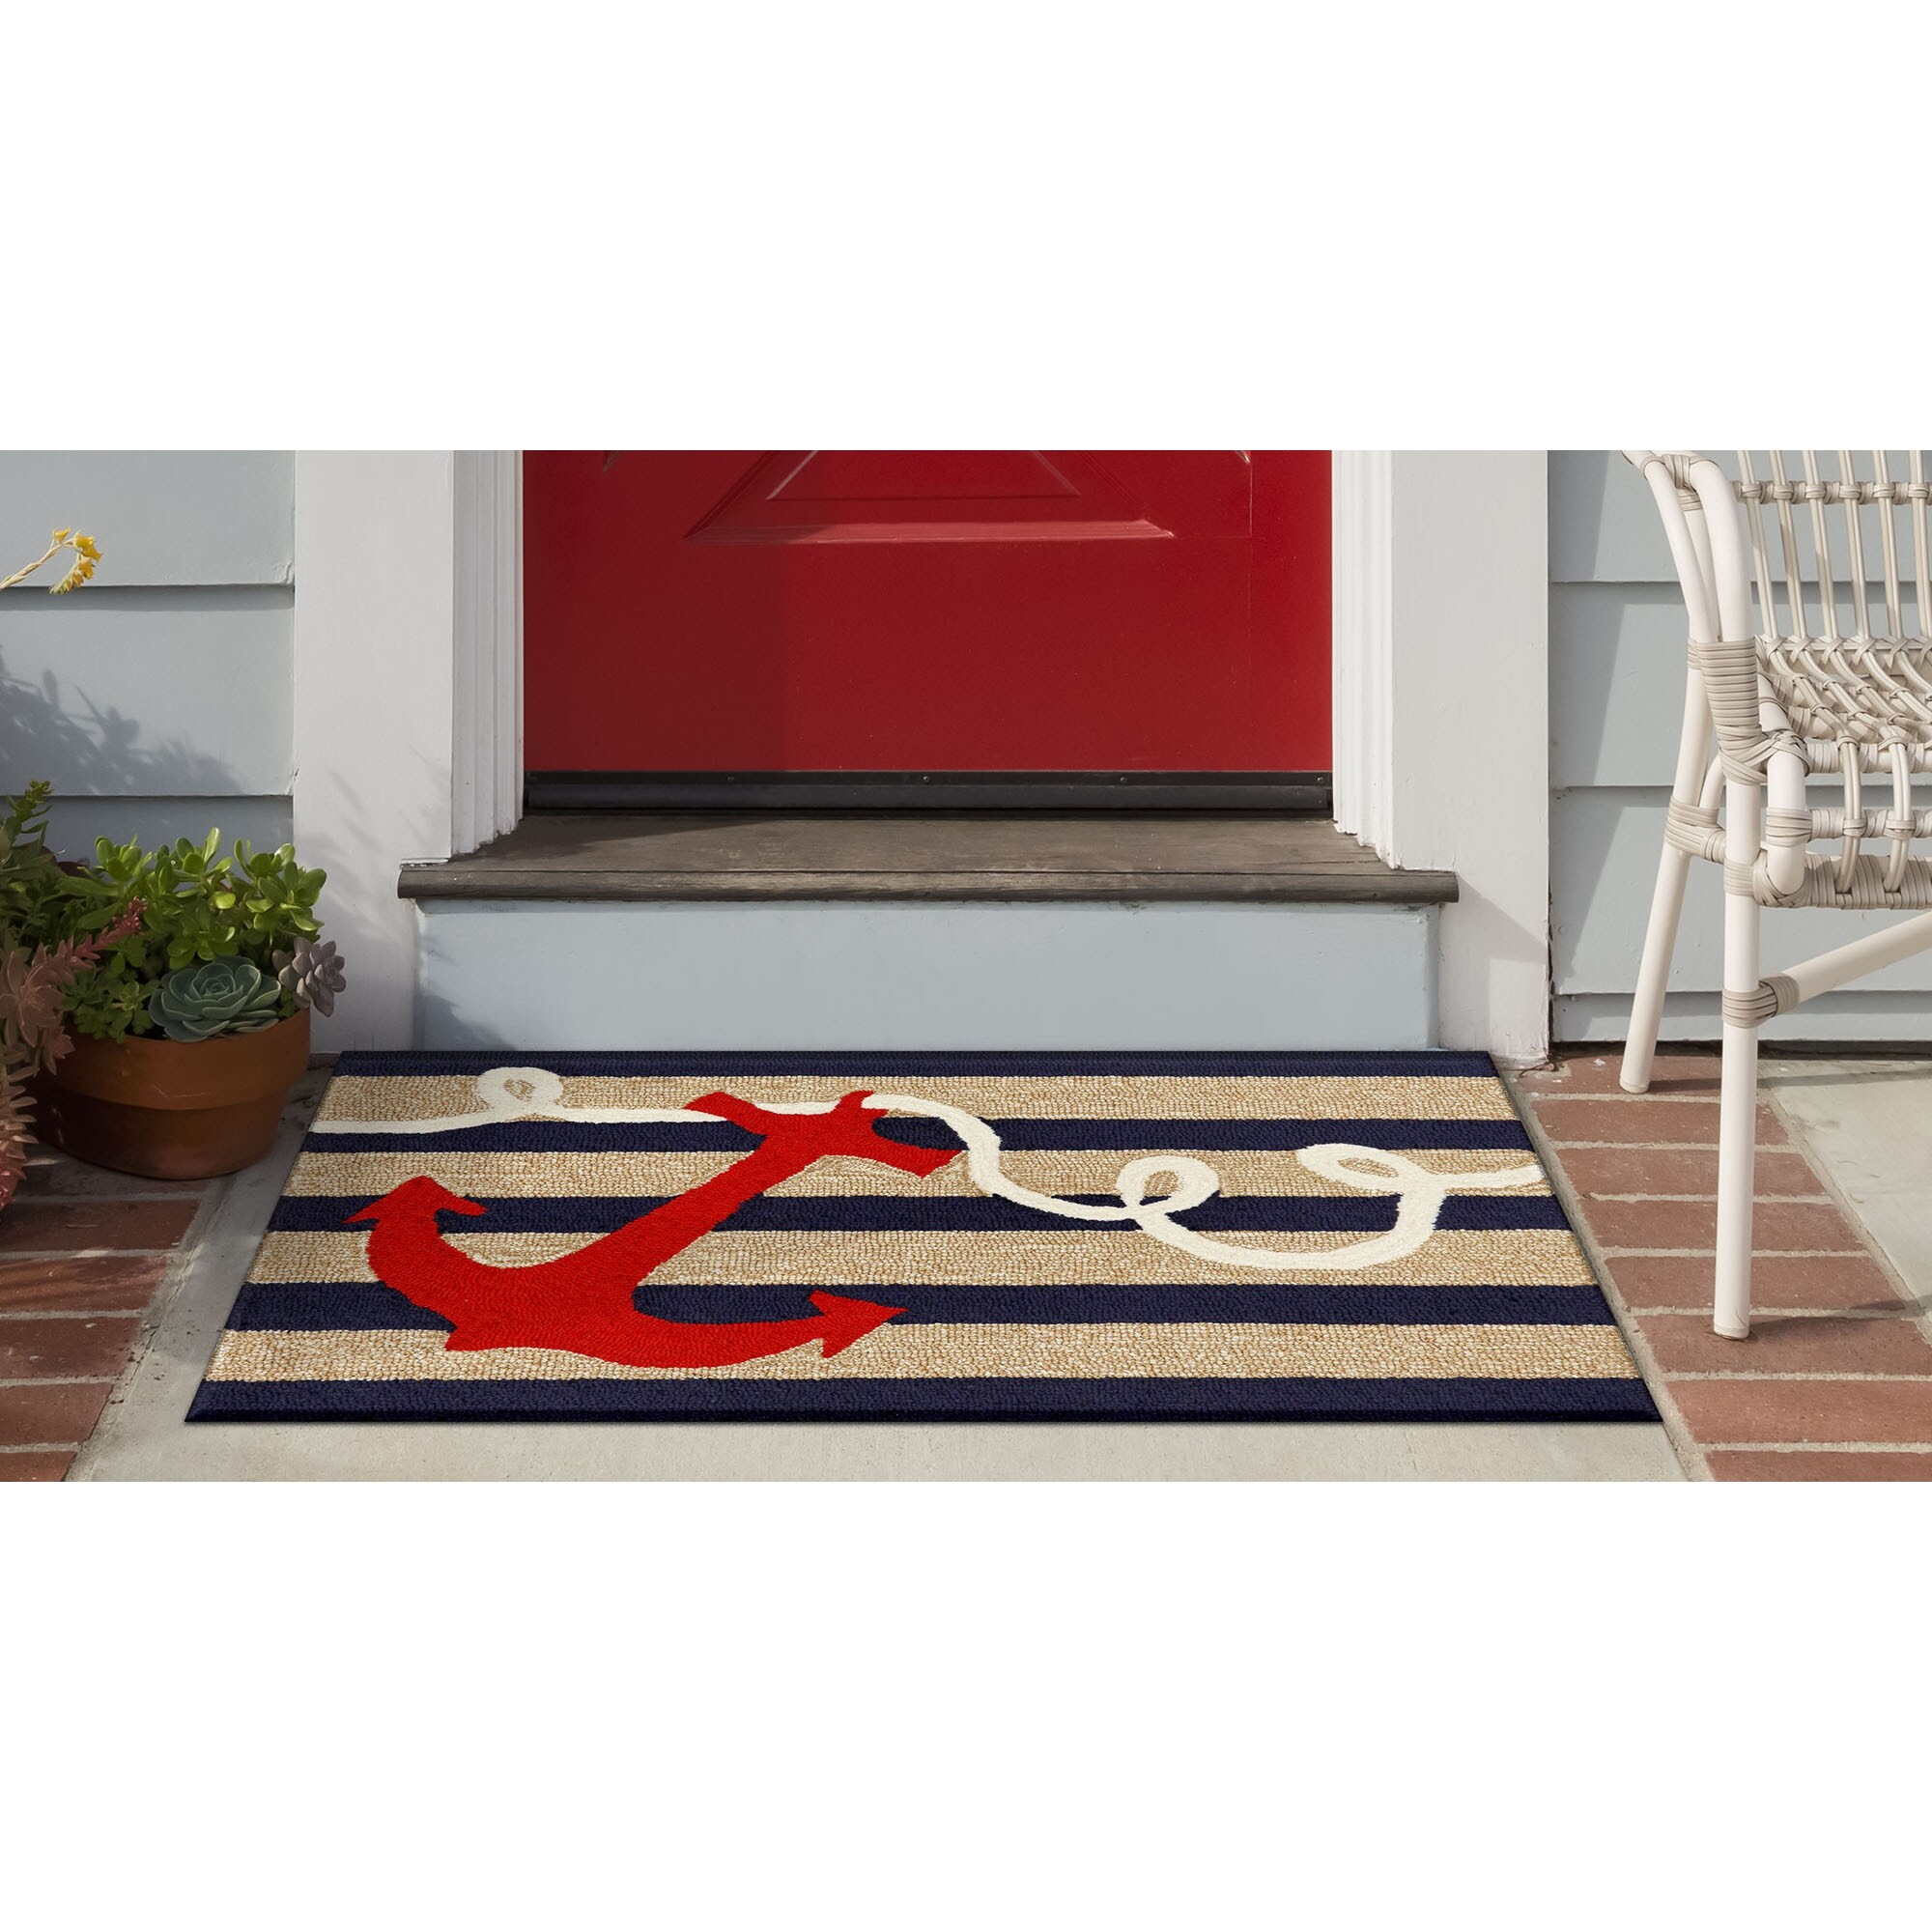 https://ak1.ostkcdn.com/images/products/is/images/direct/bbb019eecc486eeab8f9be748668e86f5cbf2c20/Liora-Manne-Frontporch-Anchor-Indoor-Outdoor-Rug-Navy-2%276-x-4%27.jpg